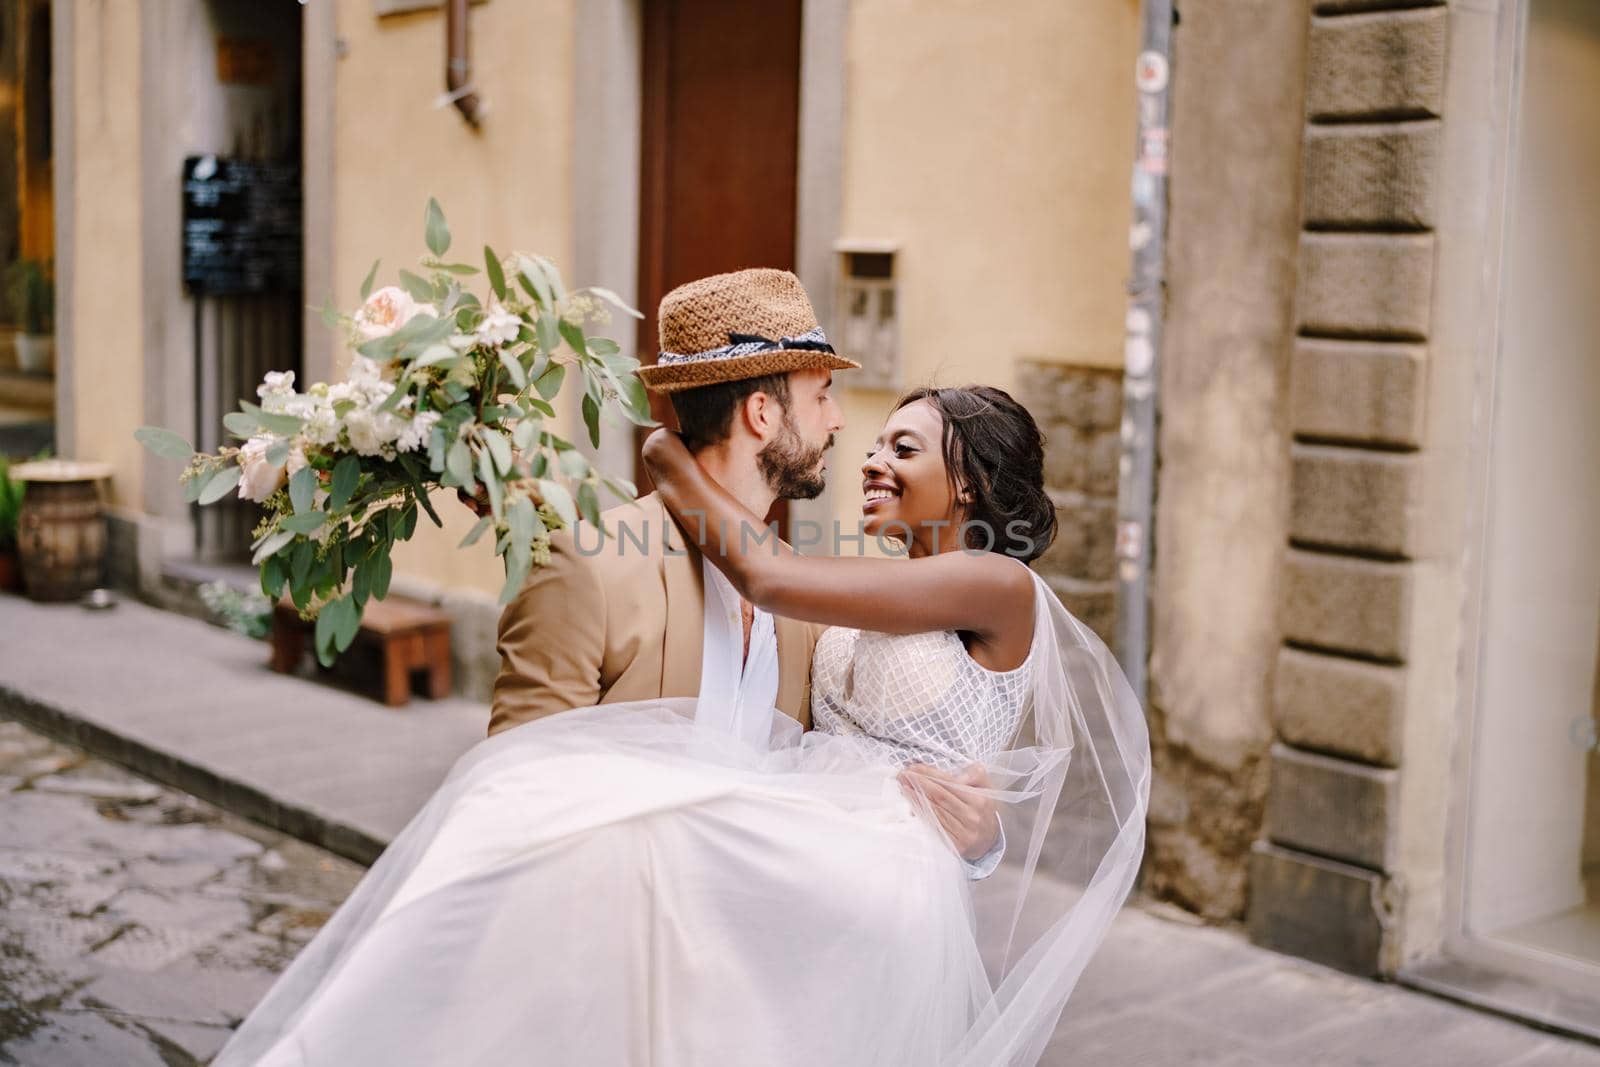 Interracial wedding couple. Wedding in Florence, Italy. Caucasian groom circling African-American bride. by Nadtochiy